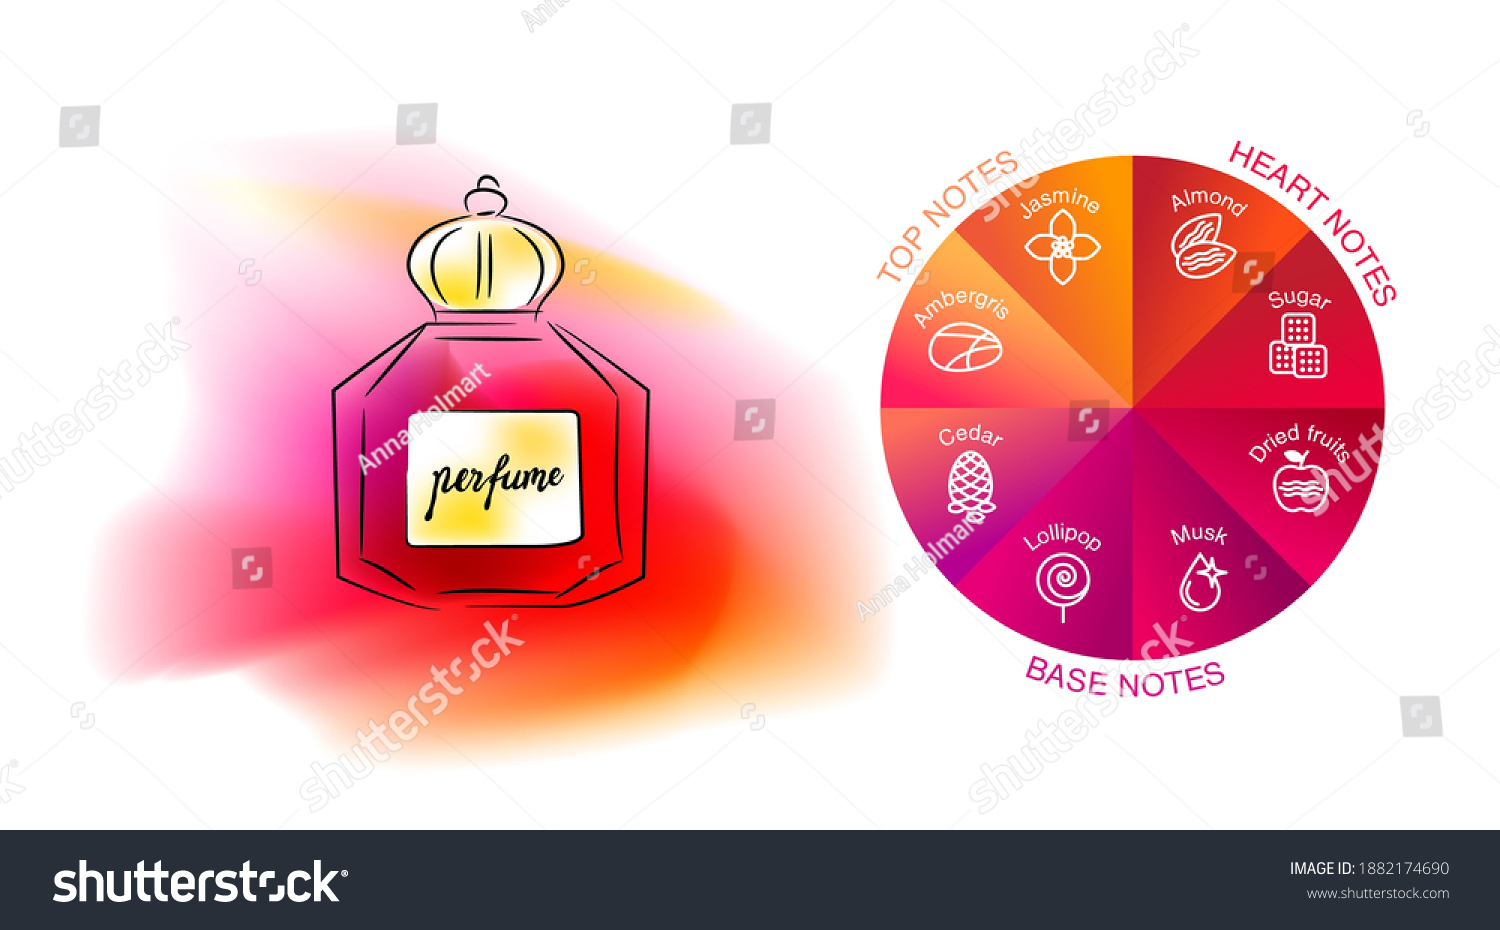 Aromatic structure notes guide for perfume, scent and aroma infographic. Top, heart, middle and base notes pyramid chart with examples of popular aroma essences. Fragrance icons. #1882174690